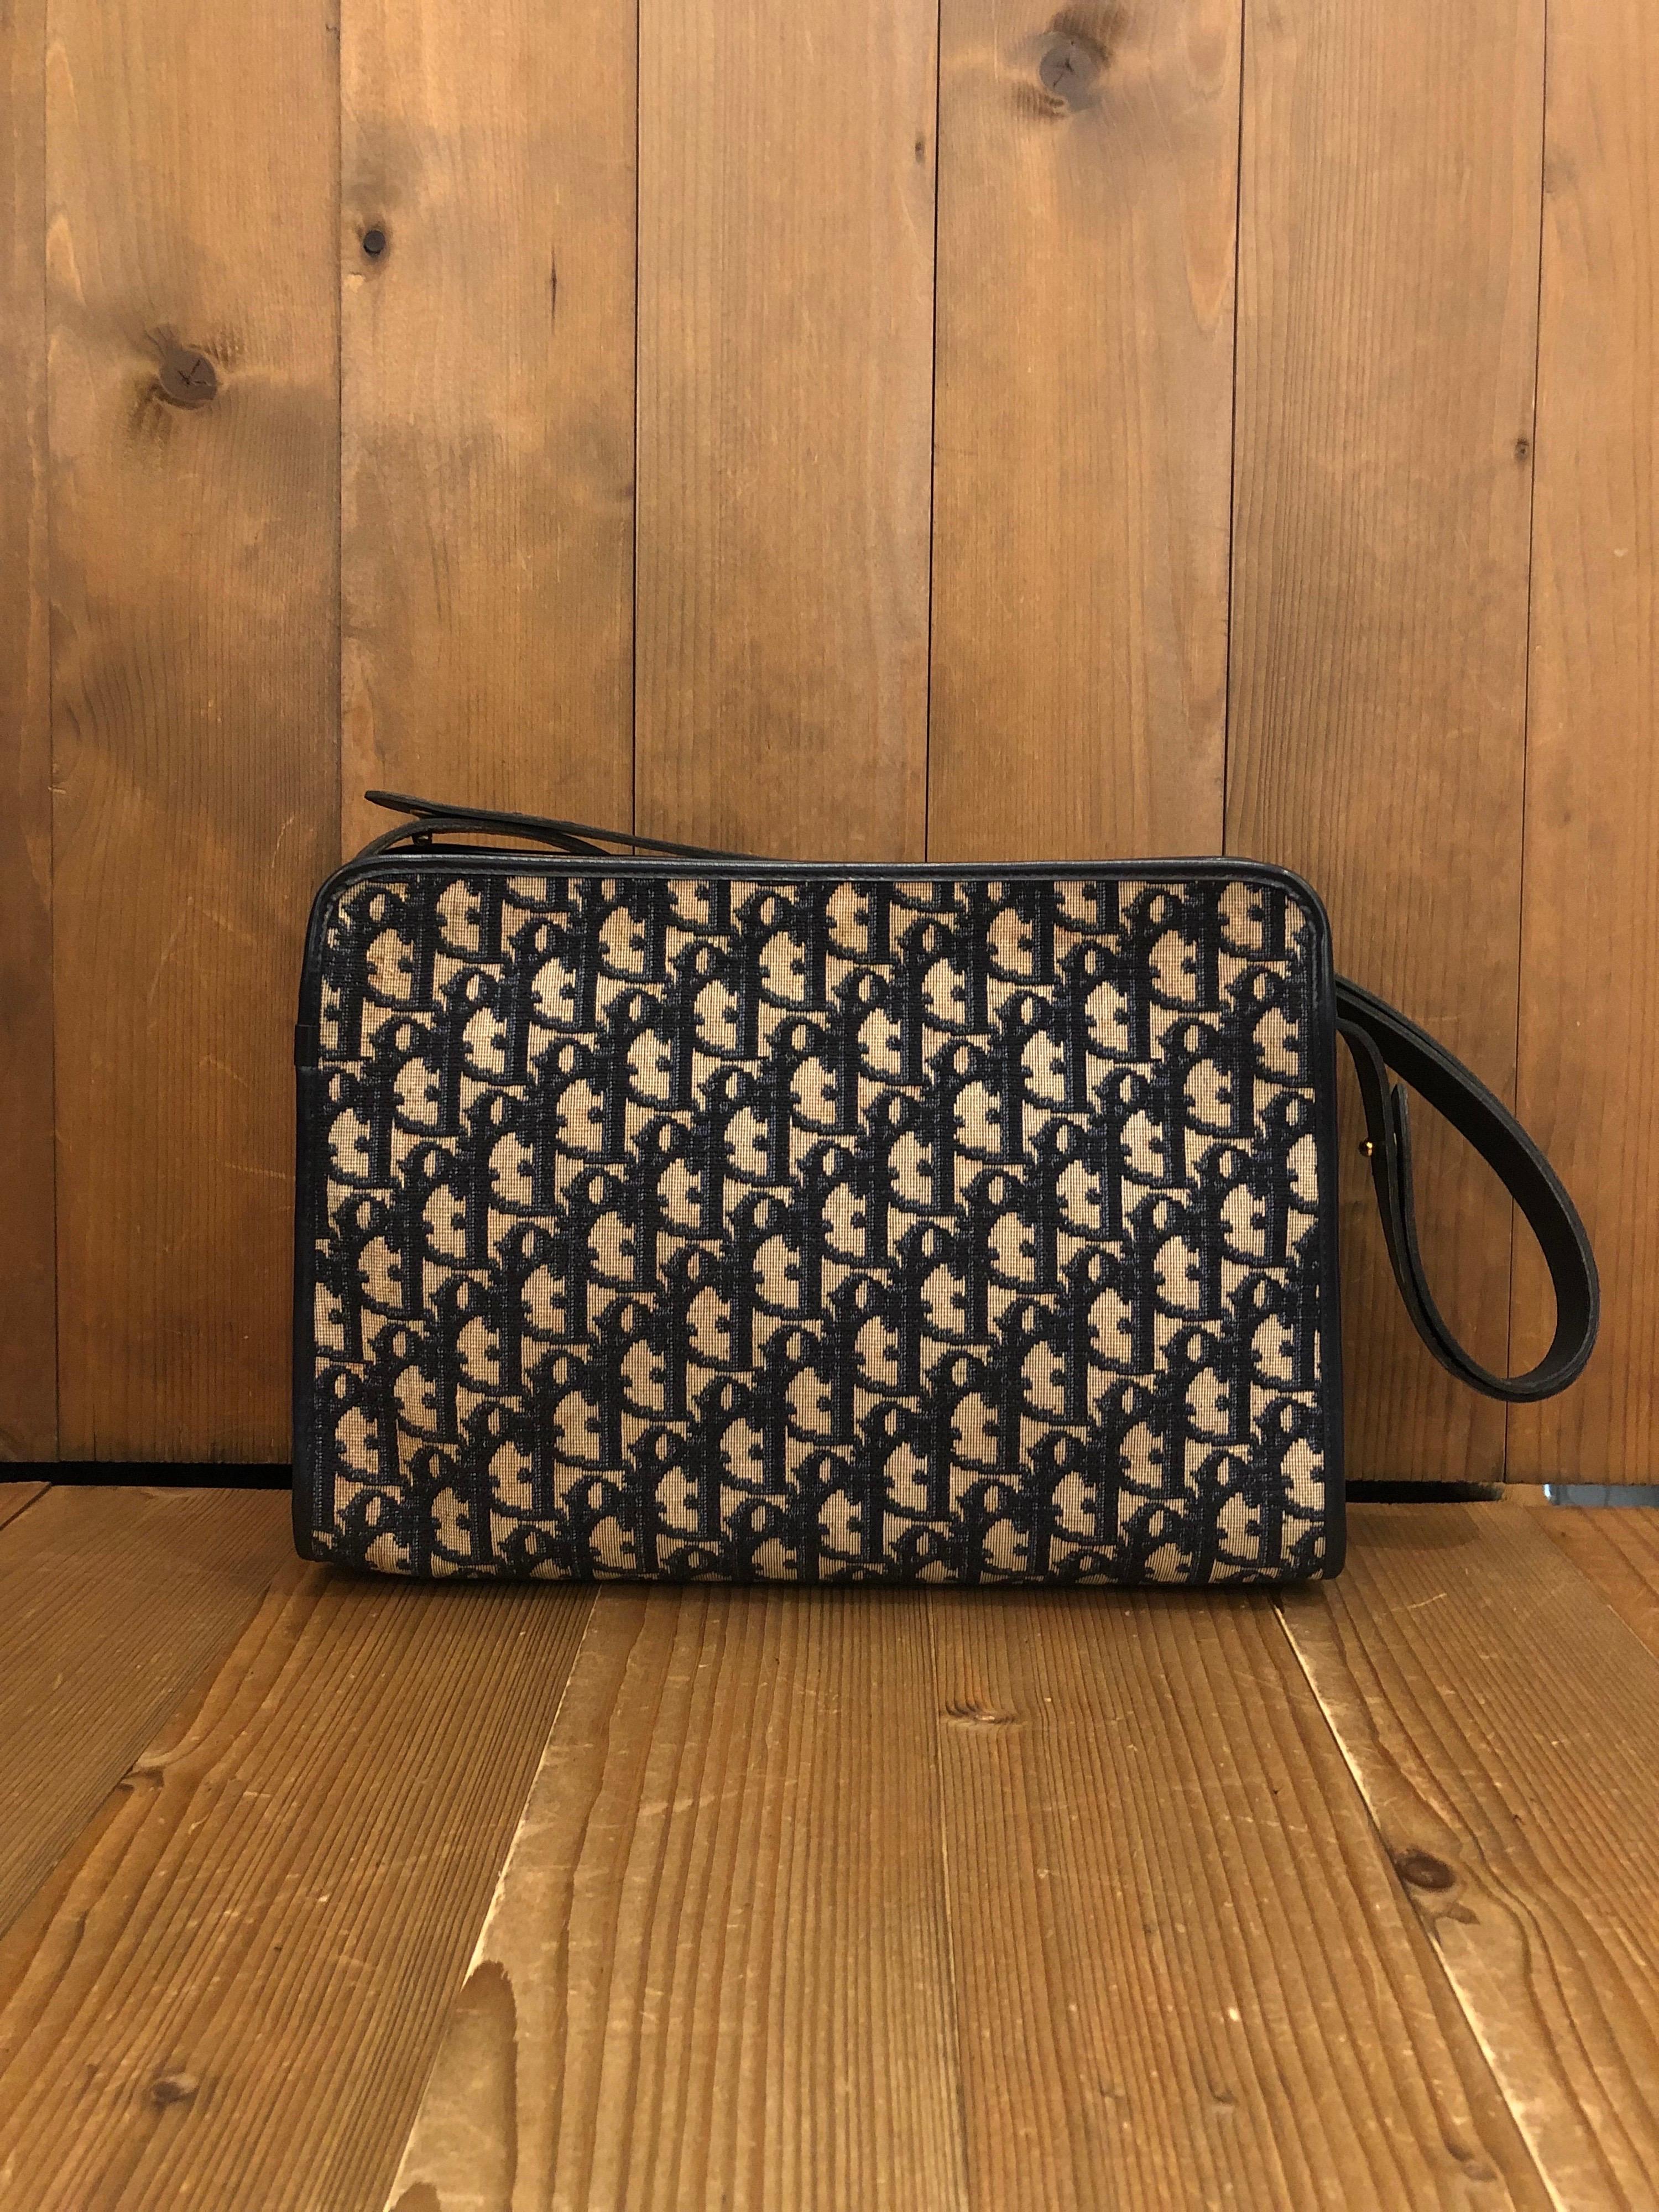 1970s Christian Dior shoulder bag in navy trotter jacquard and leather. Zipper top closure with one interior zip pocket. Made in France. Measures 11 x 8 x 3 inches Strap drop 9 inches extendable to 18 inches. Unisex style. It can be worn as a short